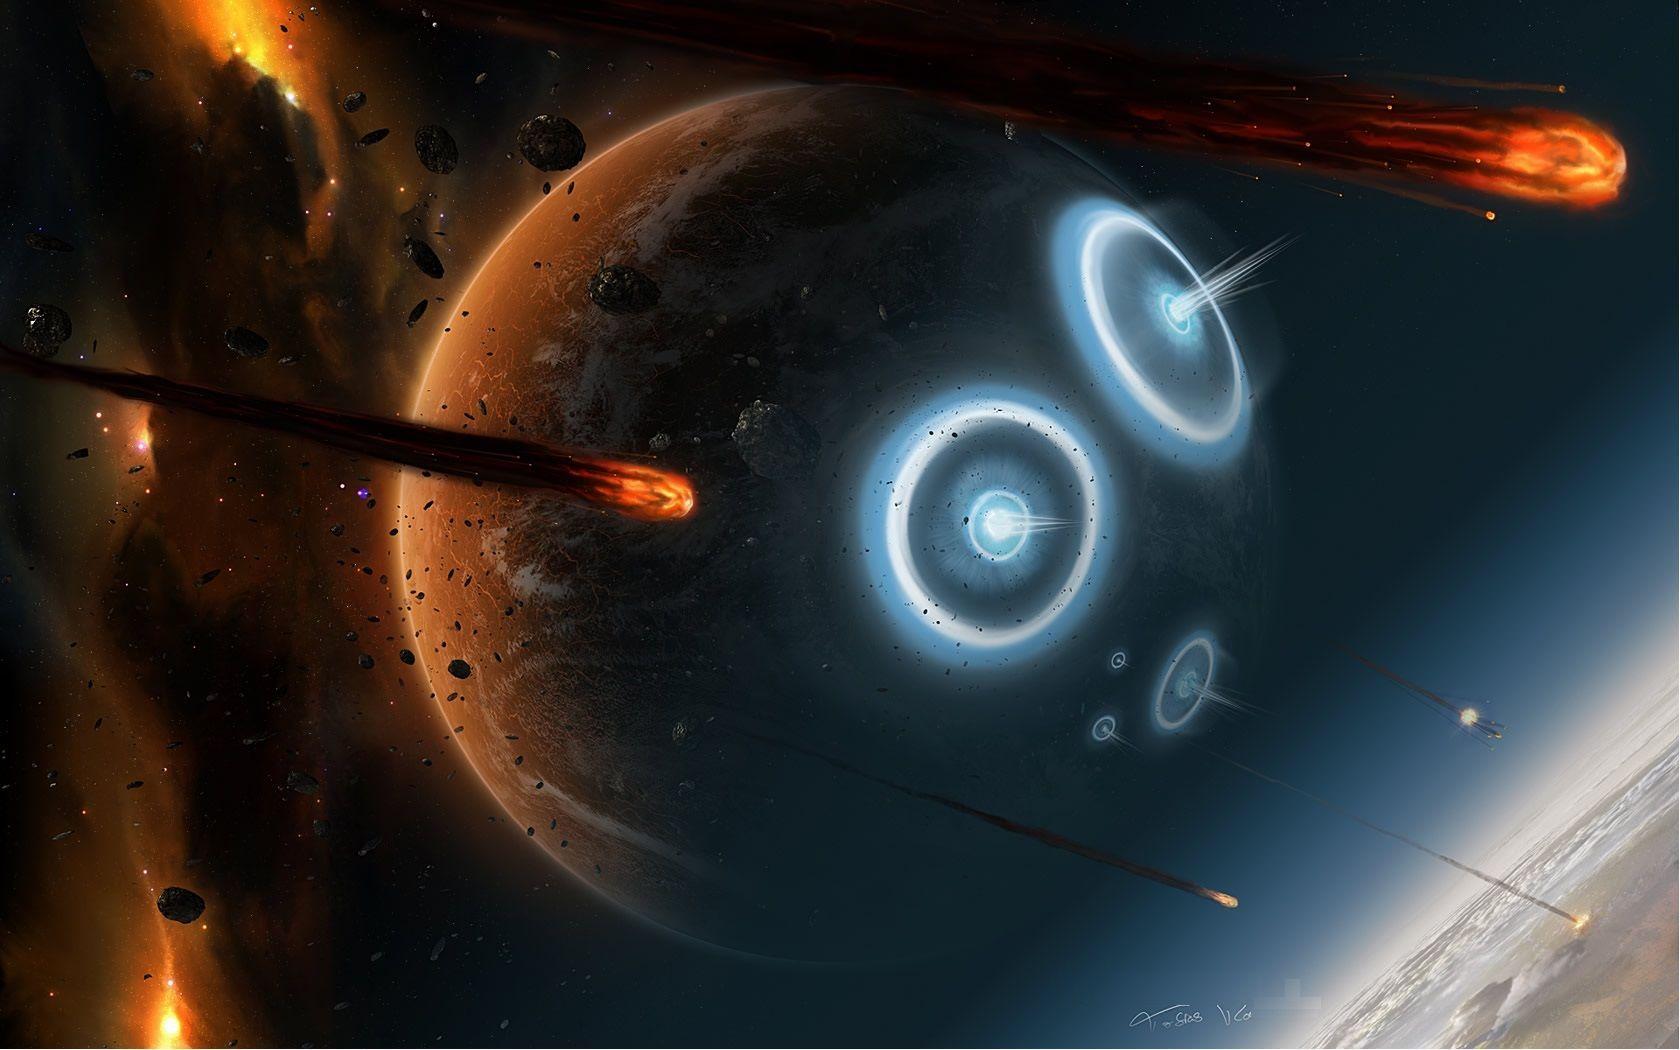 Epic Space War Wallpaper Picture #Pc1. Awesomeness